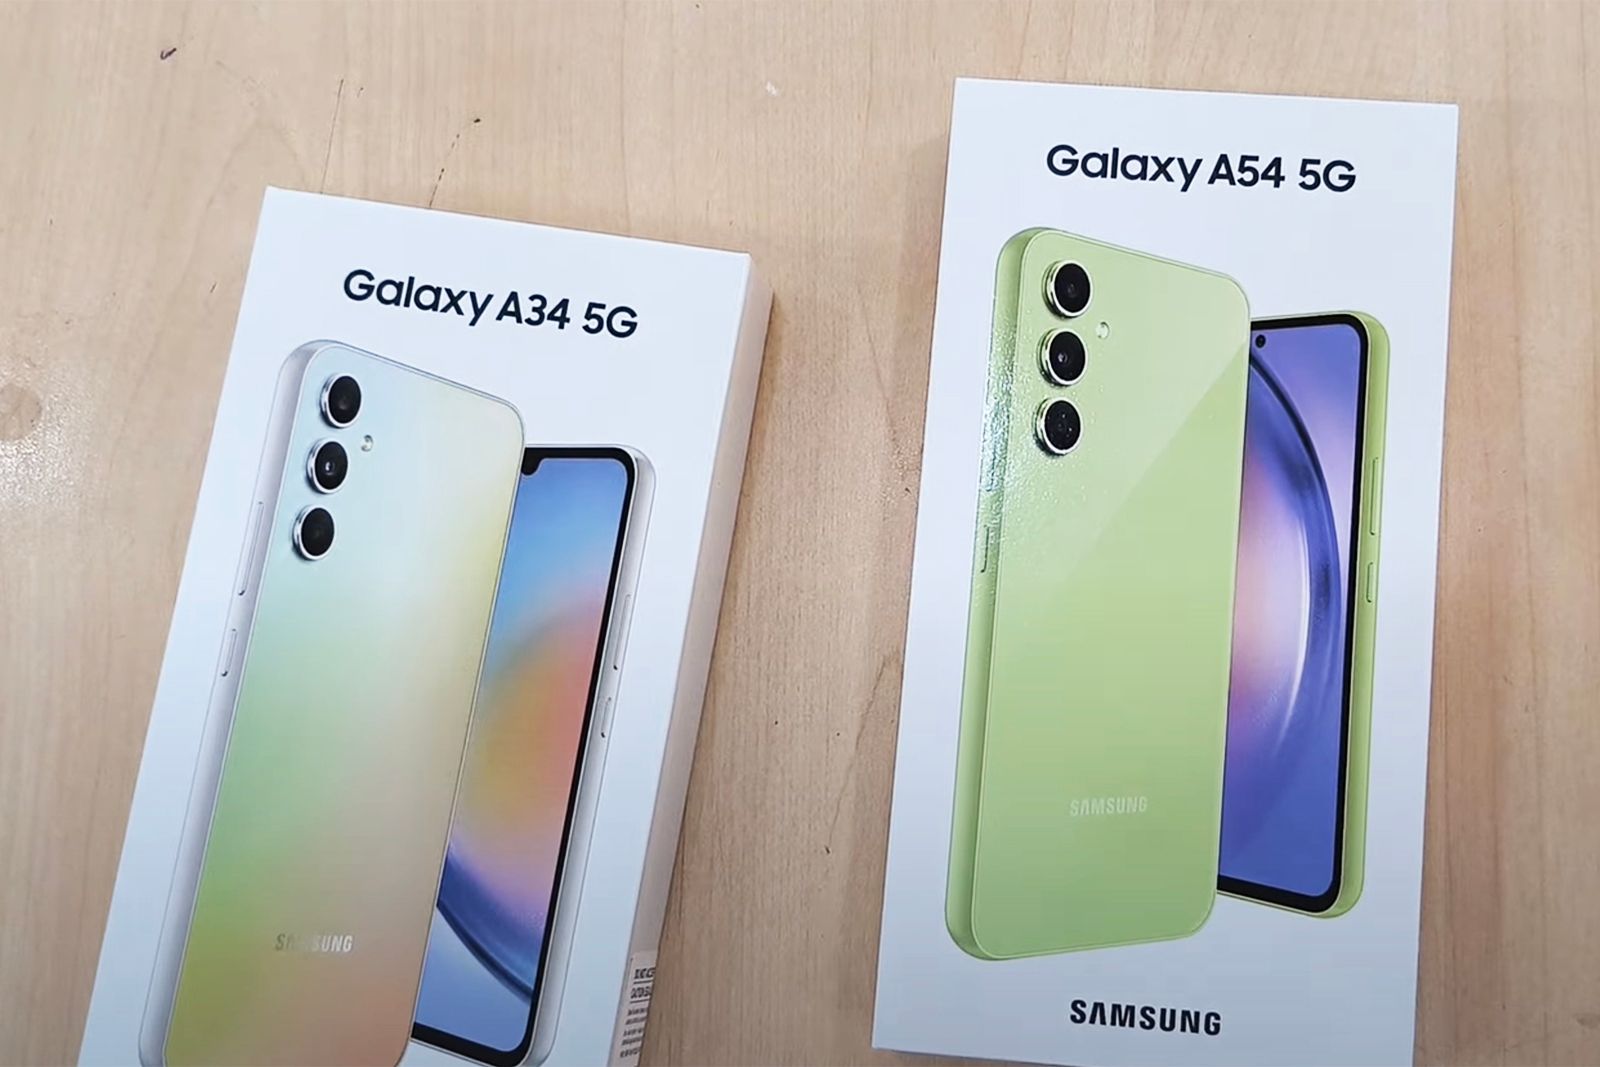 Samsung Galaxy A54 5G and A34 5G unboxing